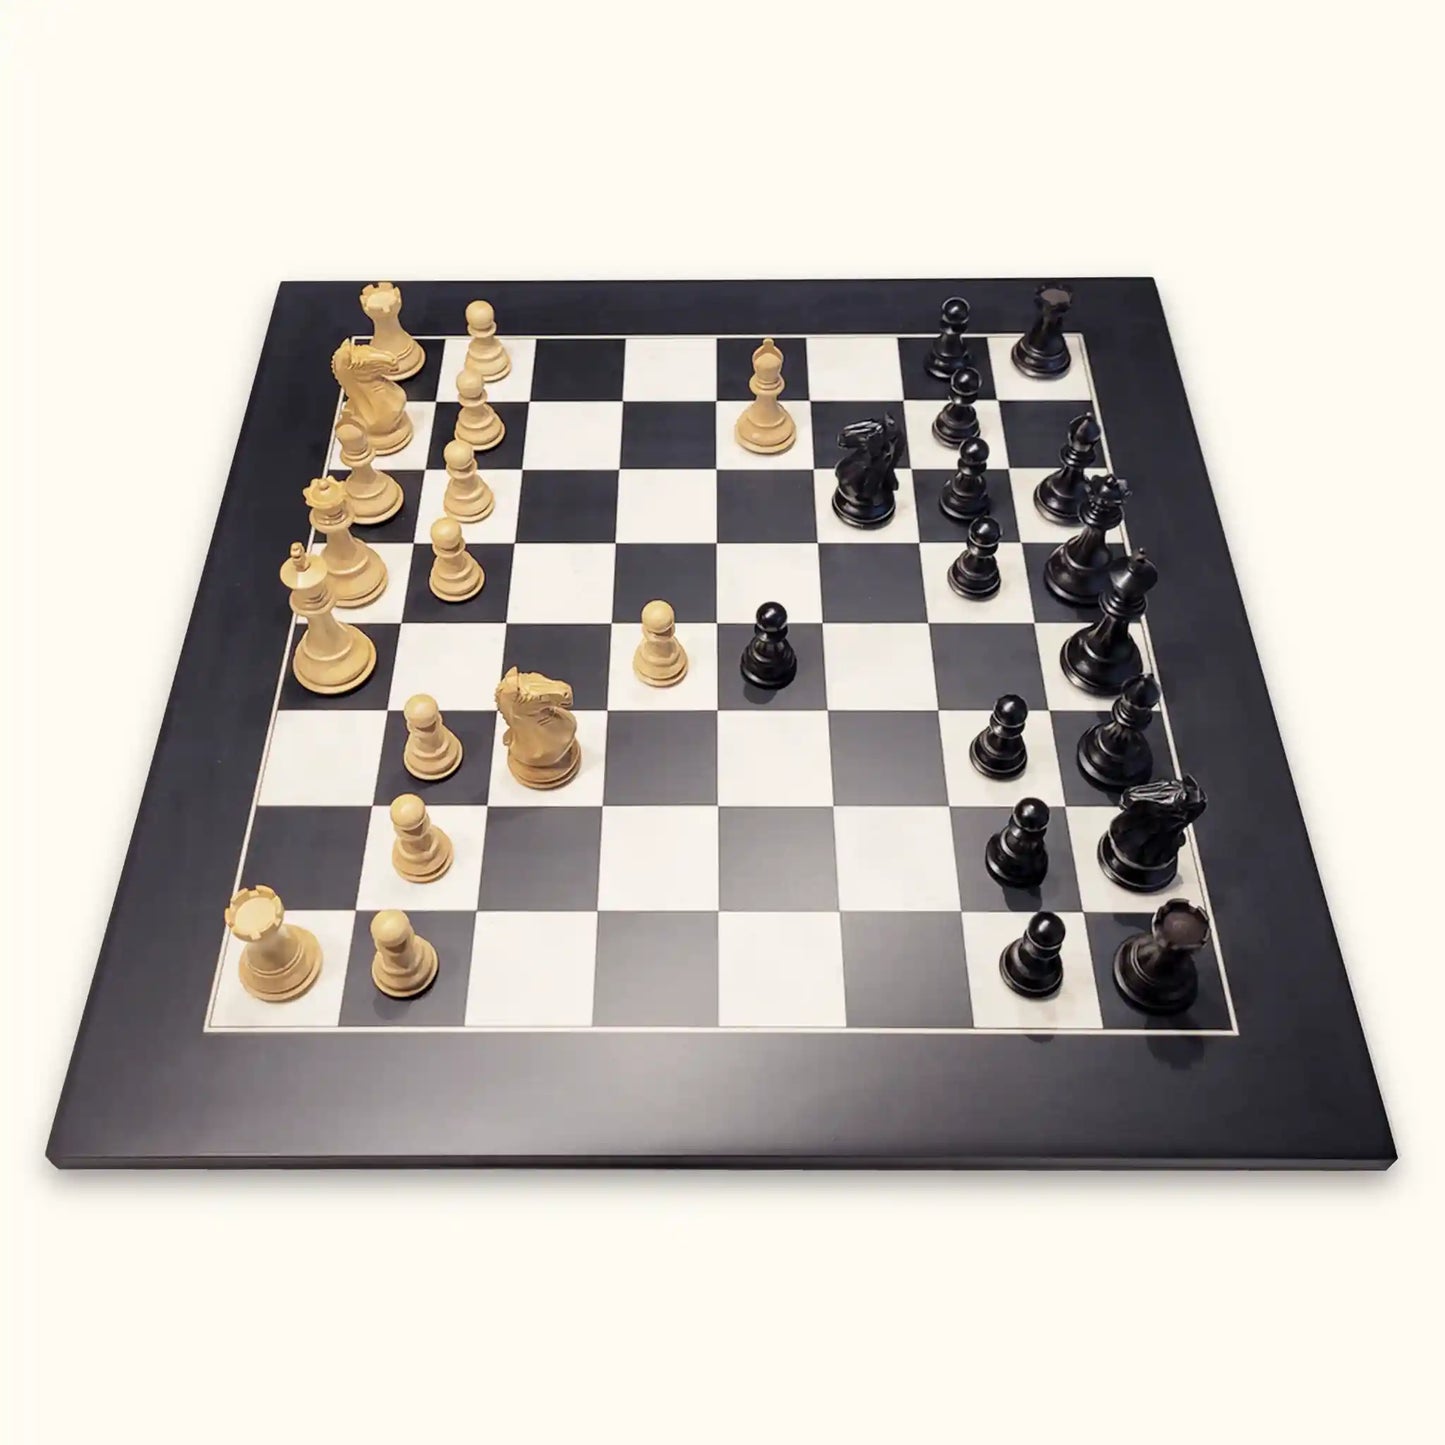 Chess pieces supreme black on black chessboard side